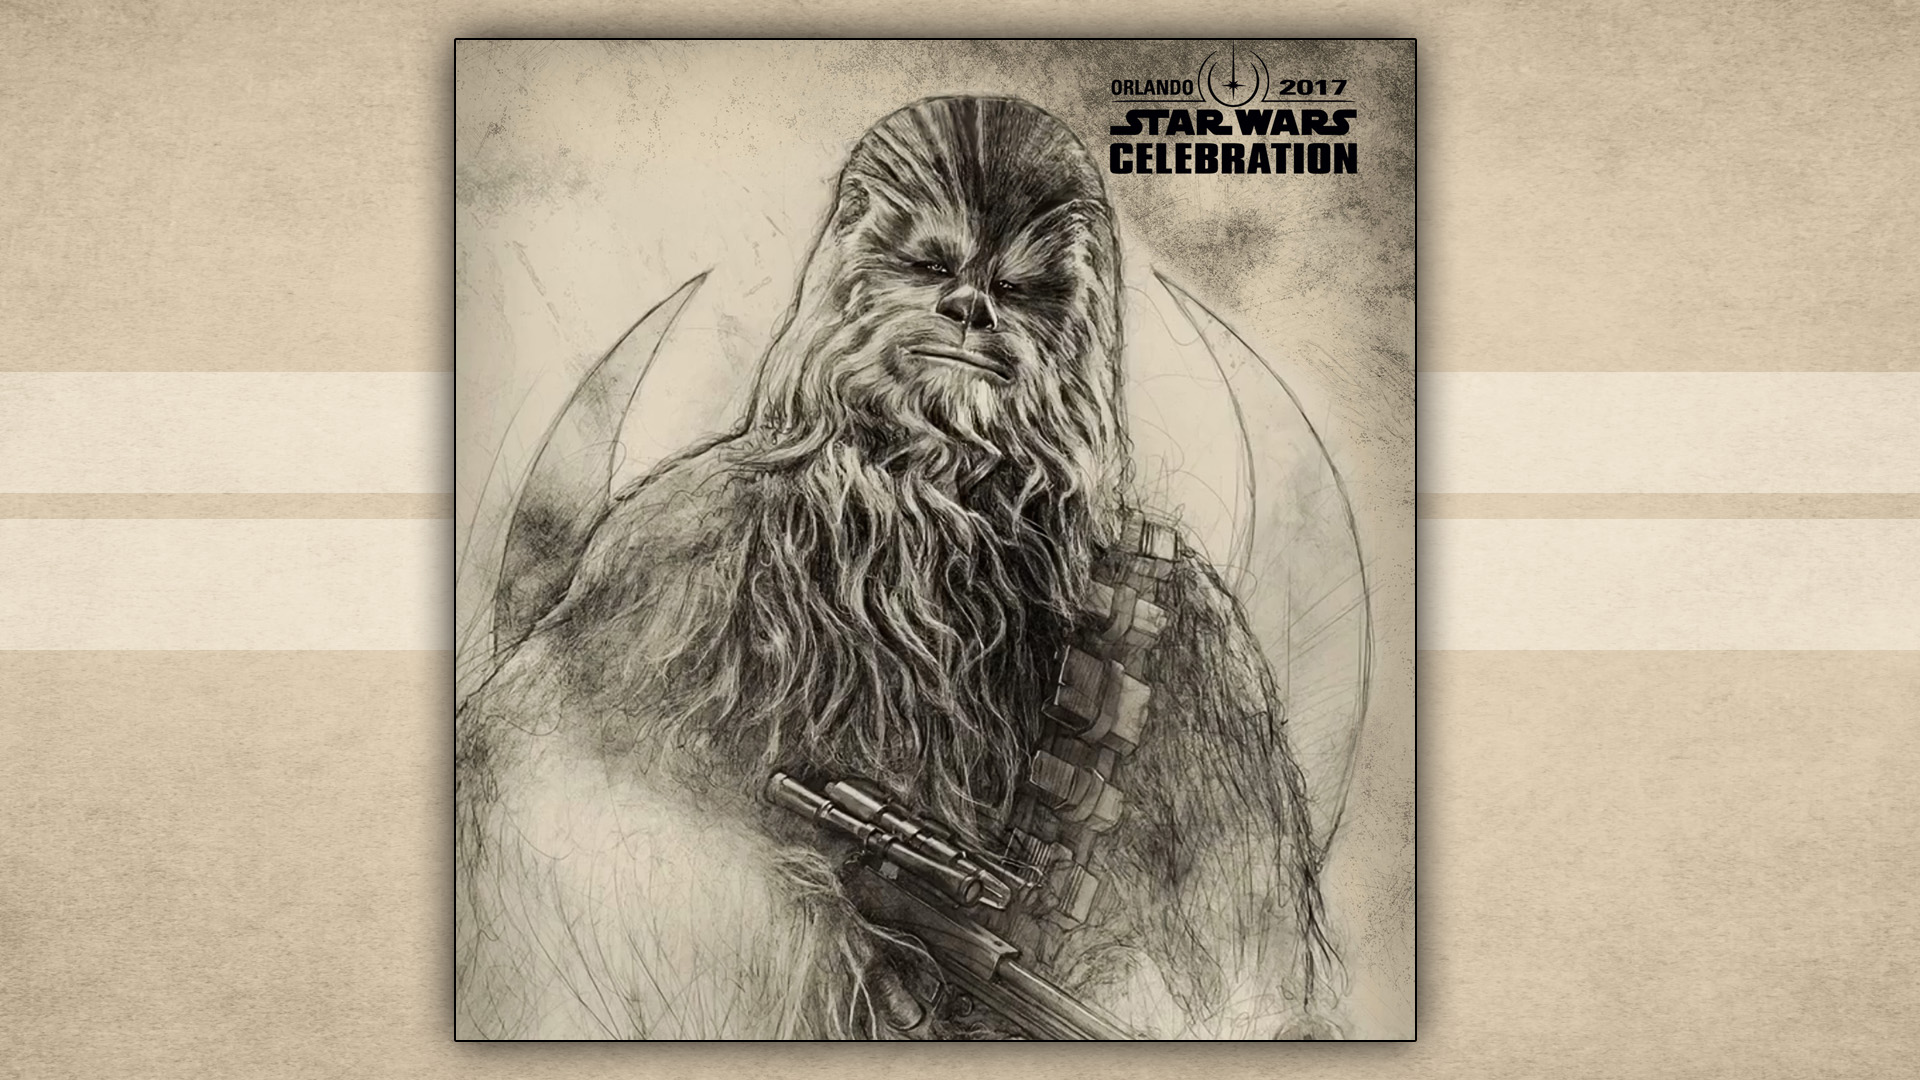 Chewbacca Cool Art Wallpapers